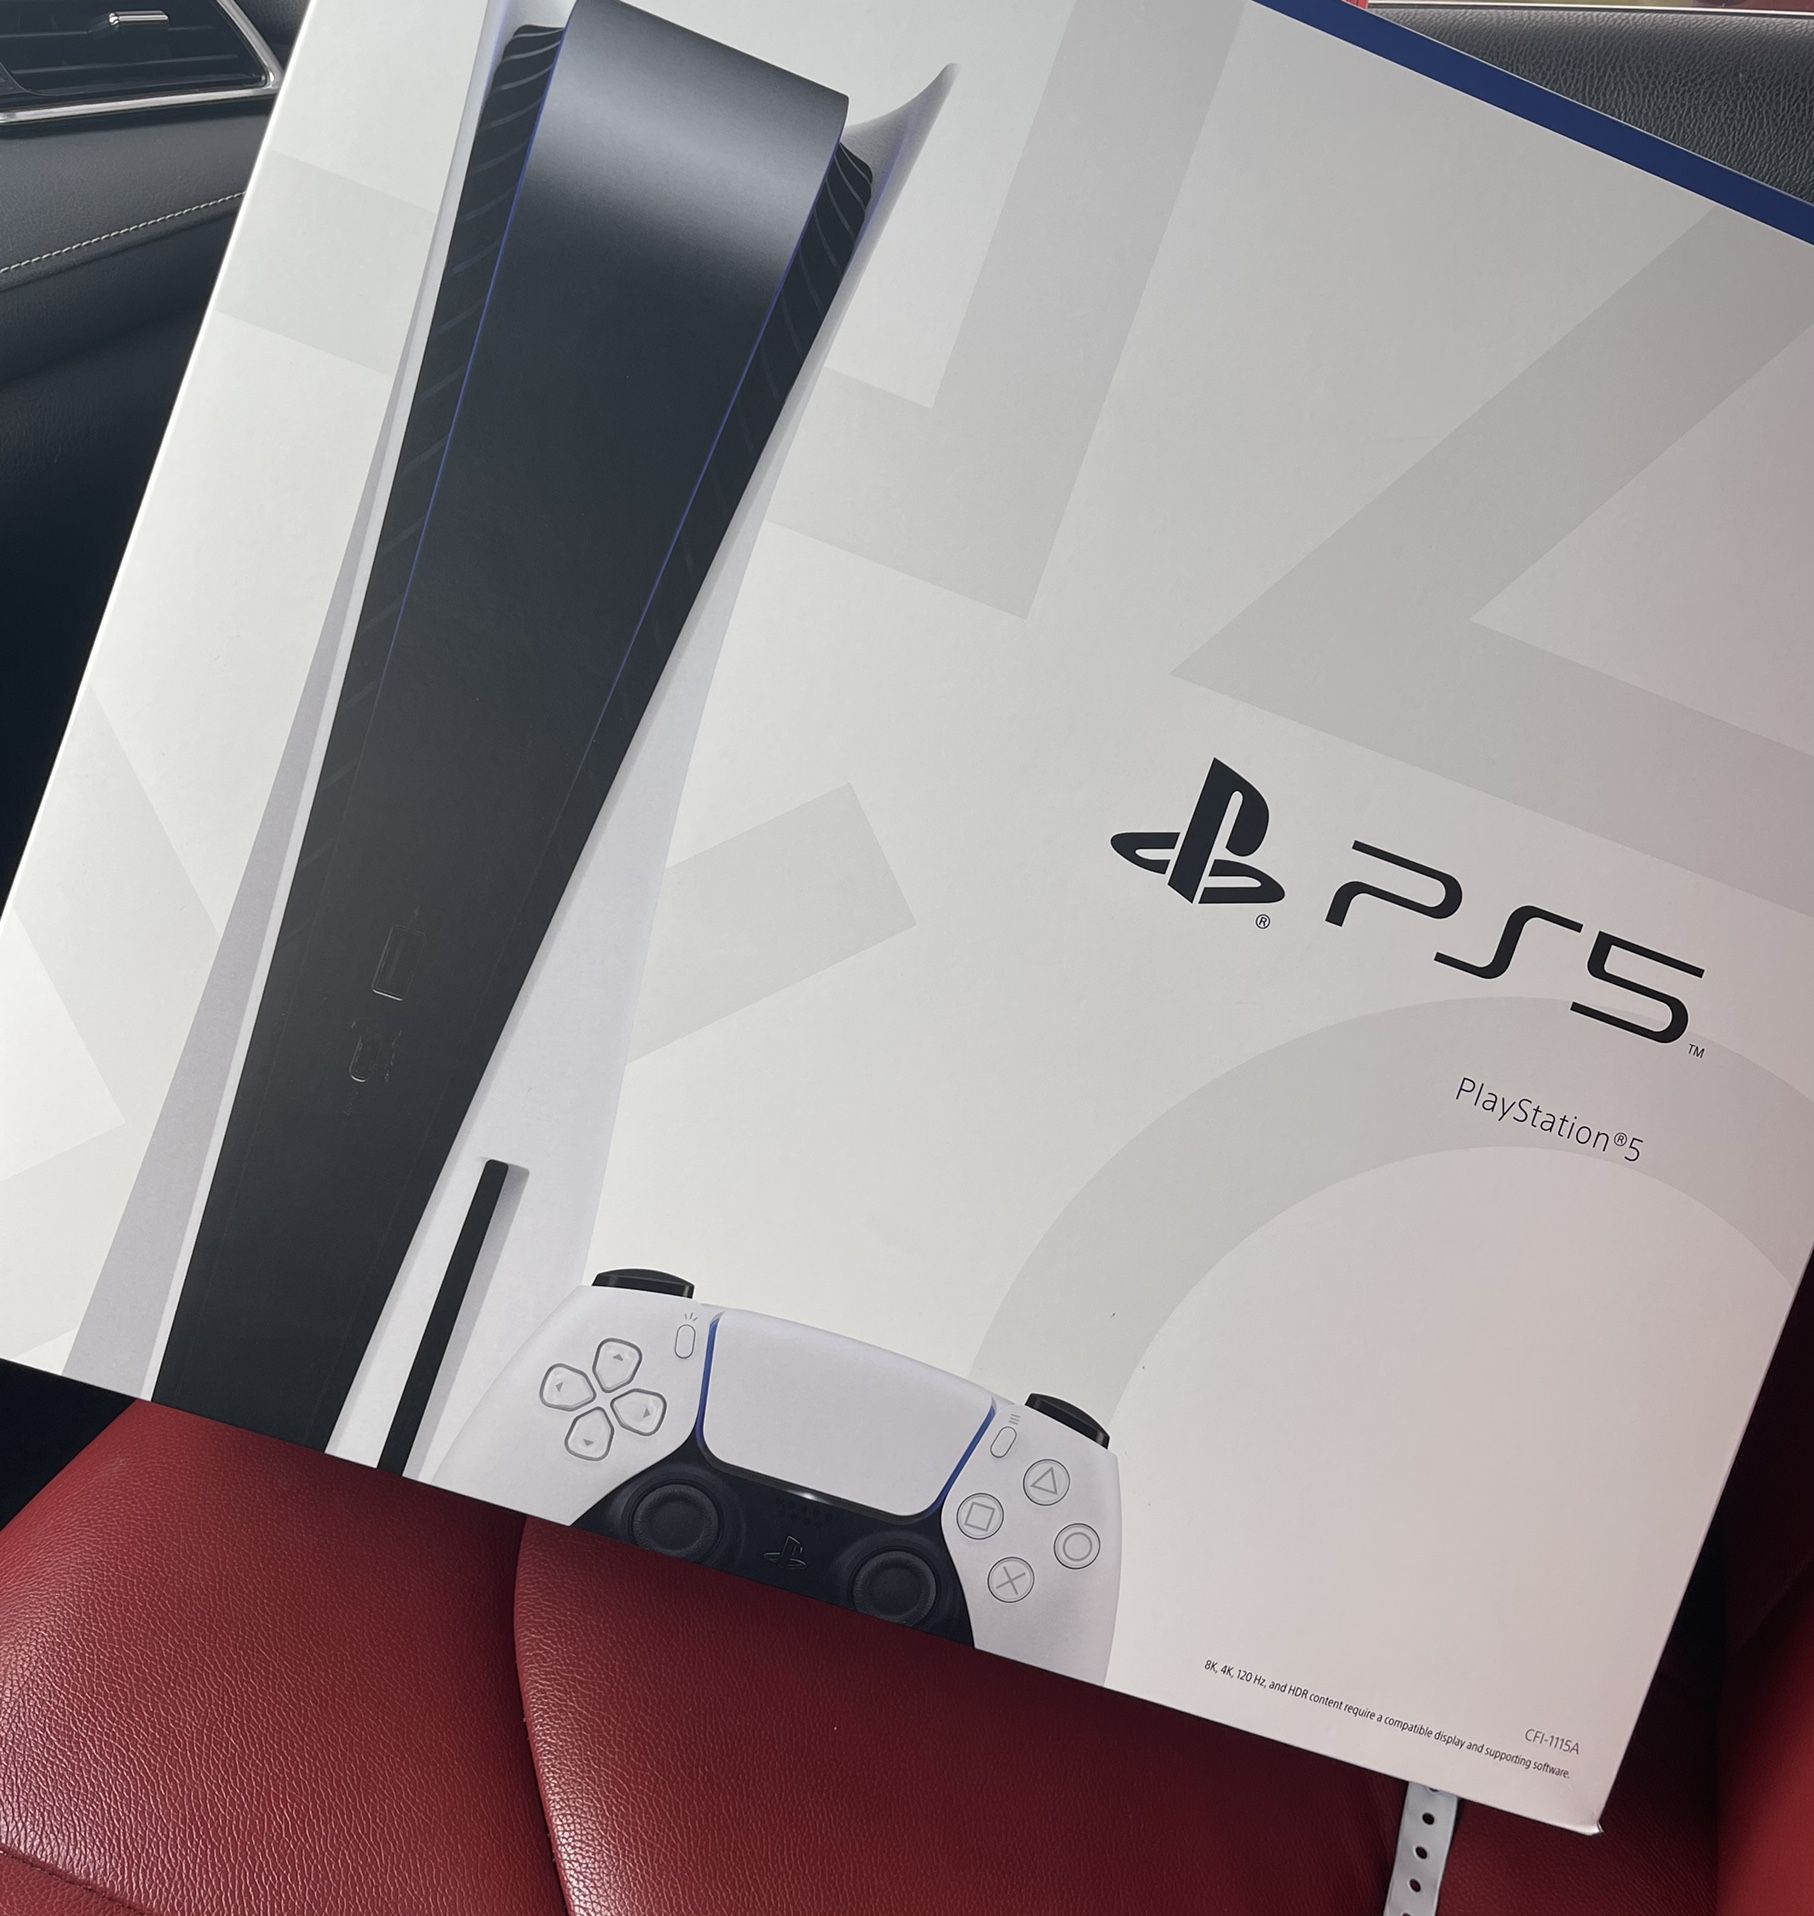 Brand new Ps5 